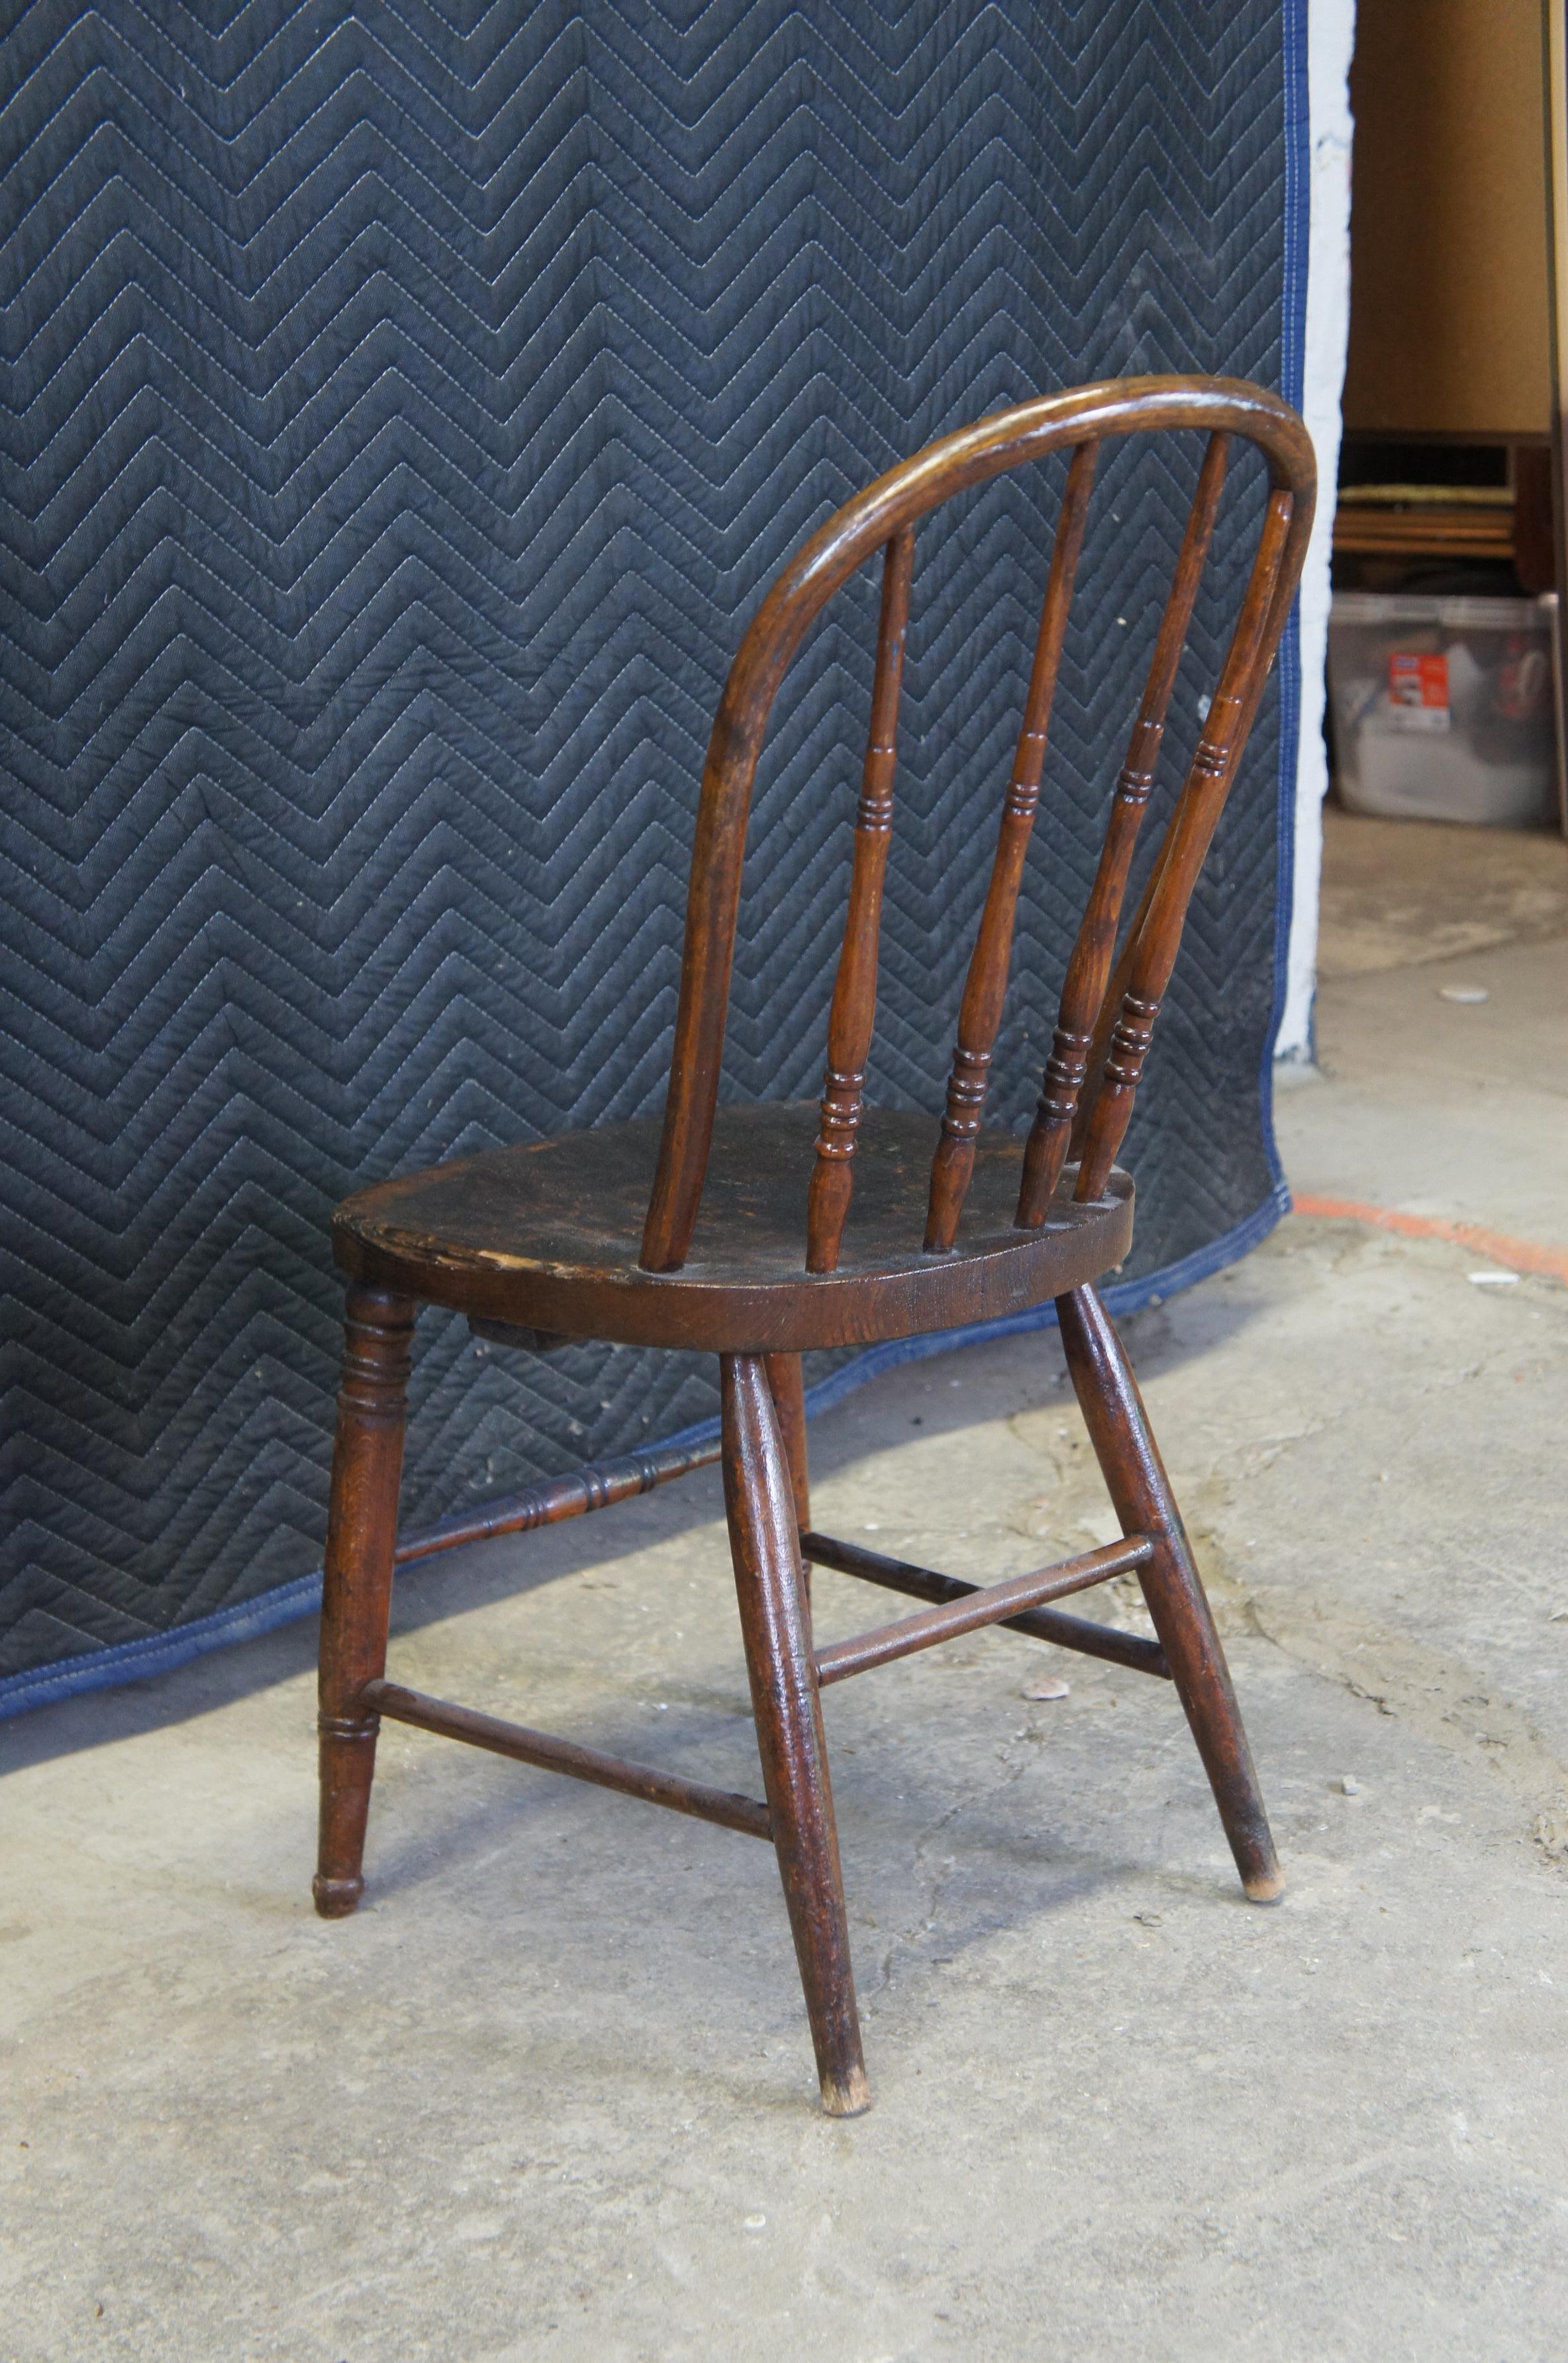 American Colonial Primitive Antique Early American Windsor Bowback Oak Dining Side Chair Spindle